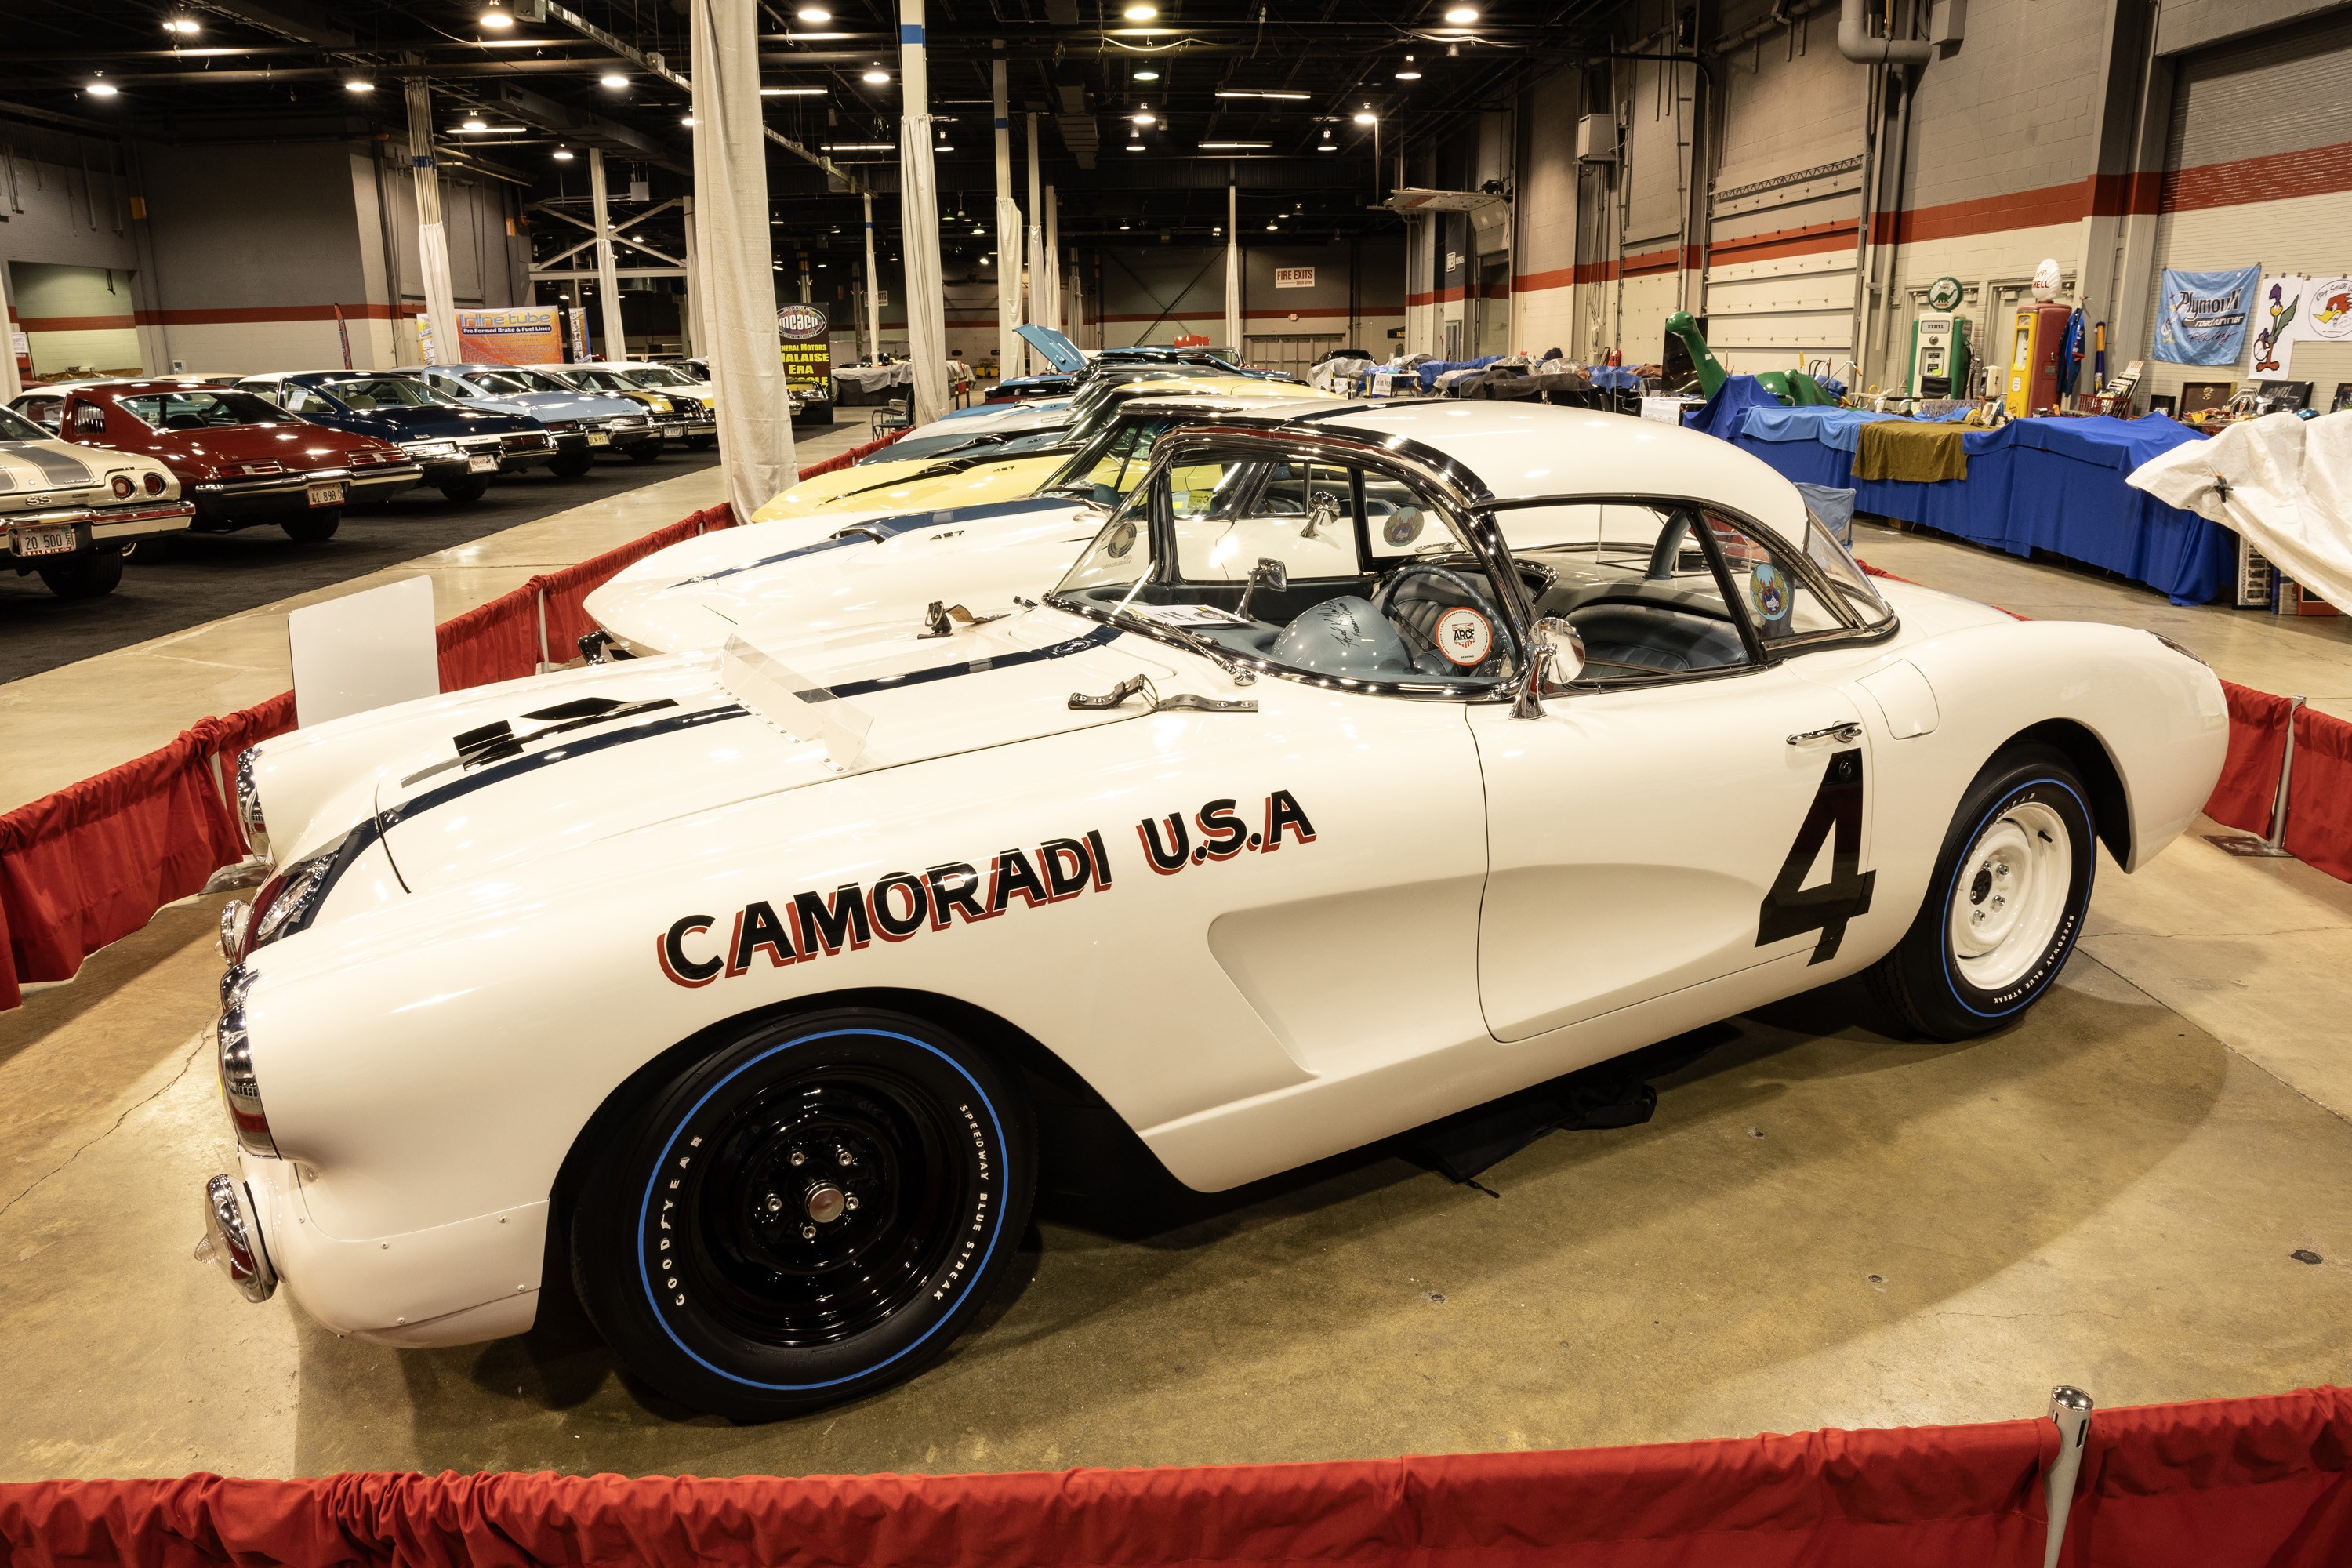 MCACN 2023: This Incredible 1960 Corvette Left the Assembly plant with a Full Suite of Road Racing Options